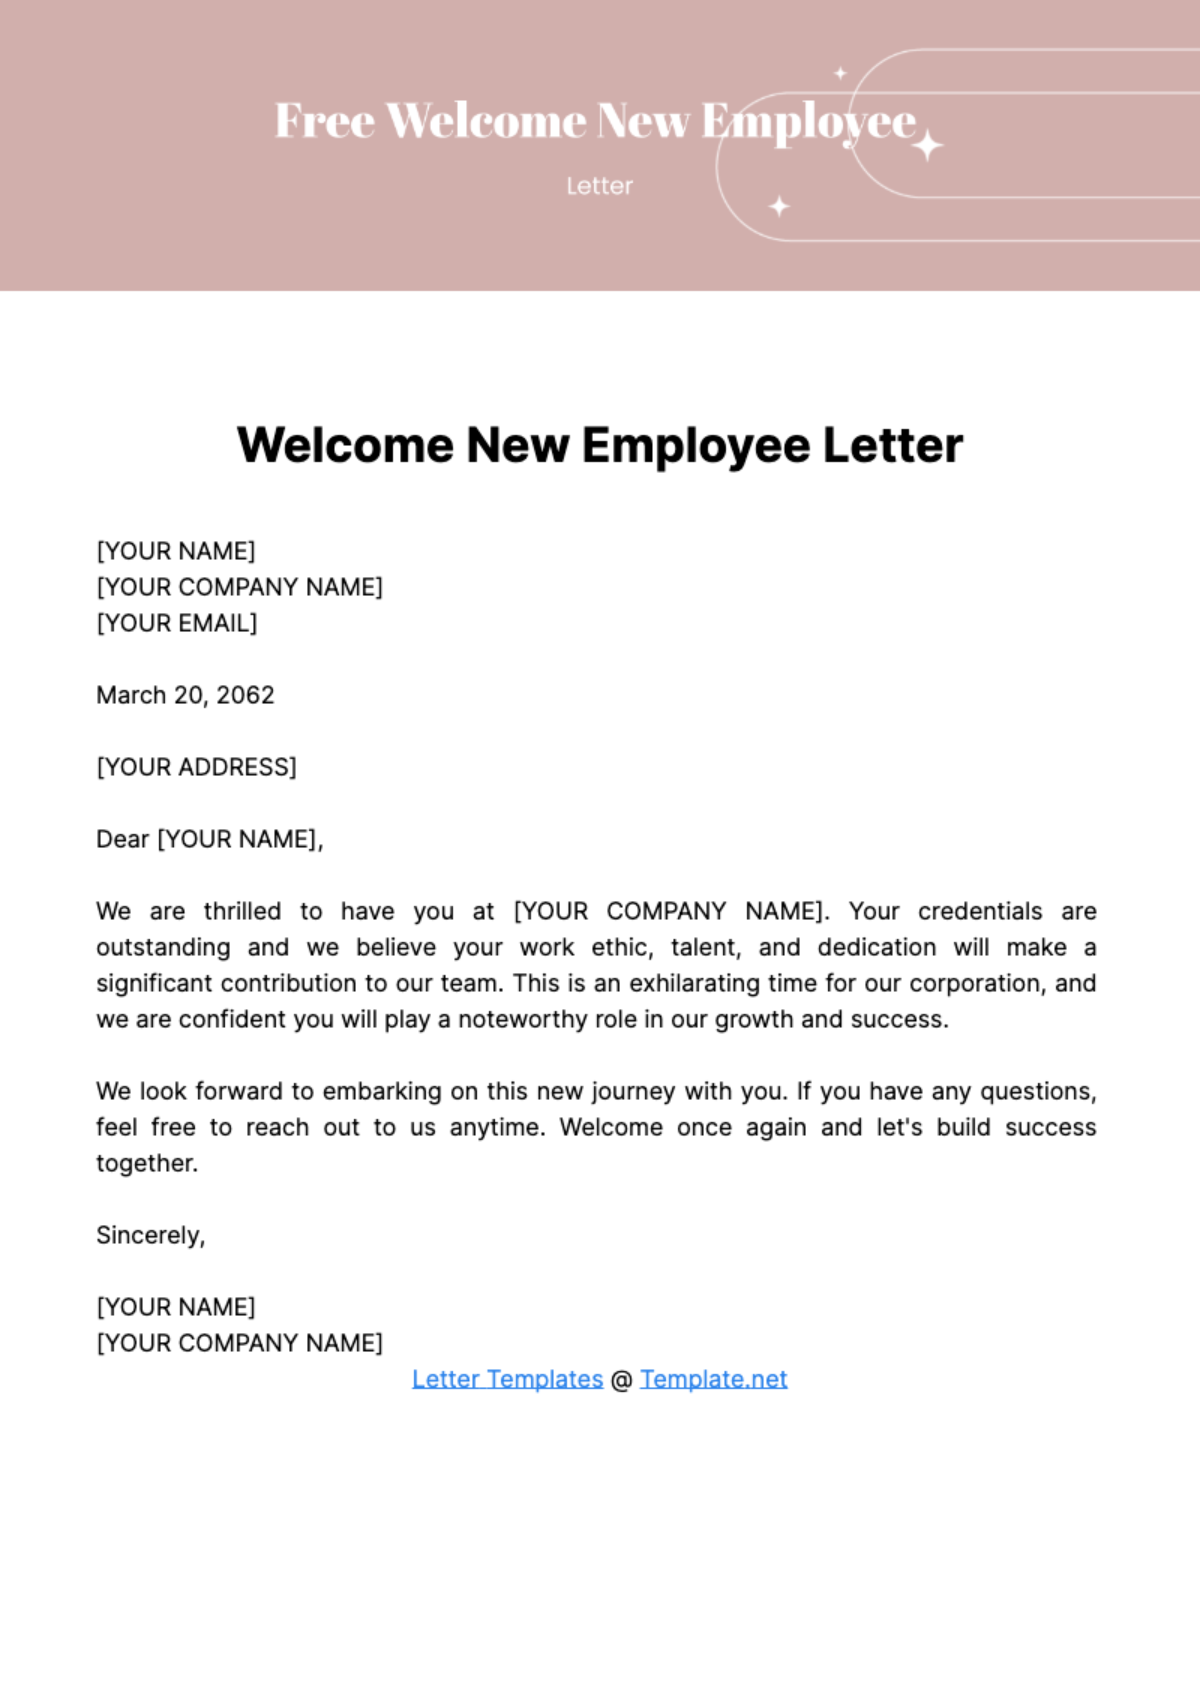 Free Welcome New Employee Letter Template